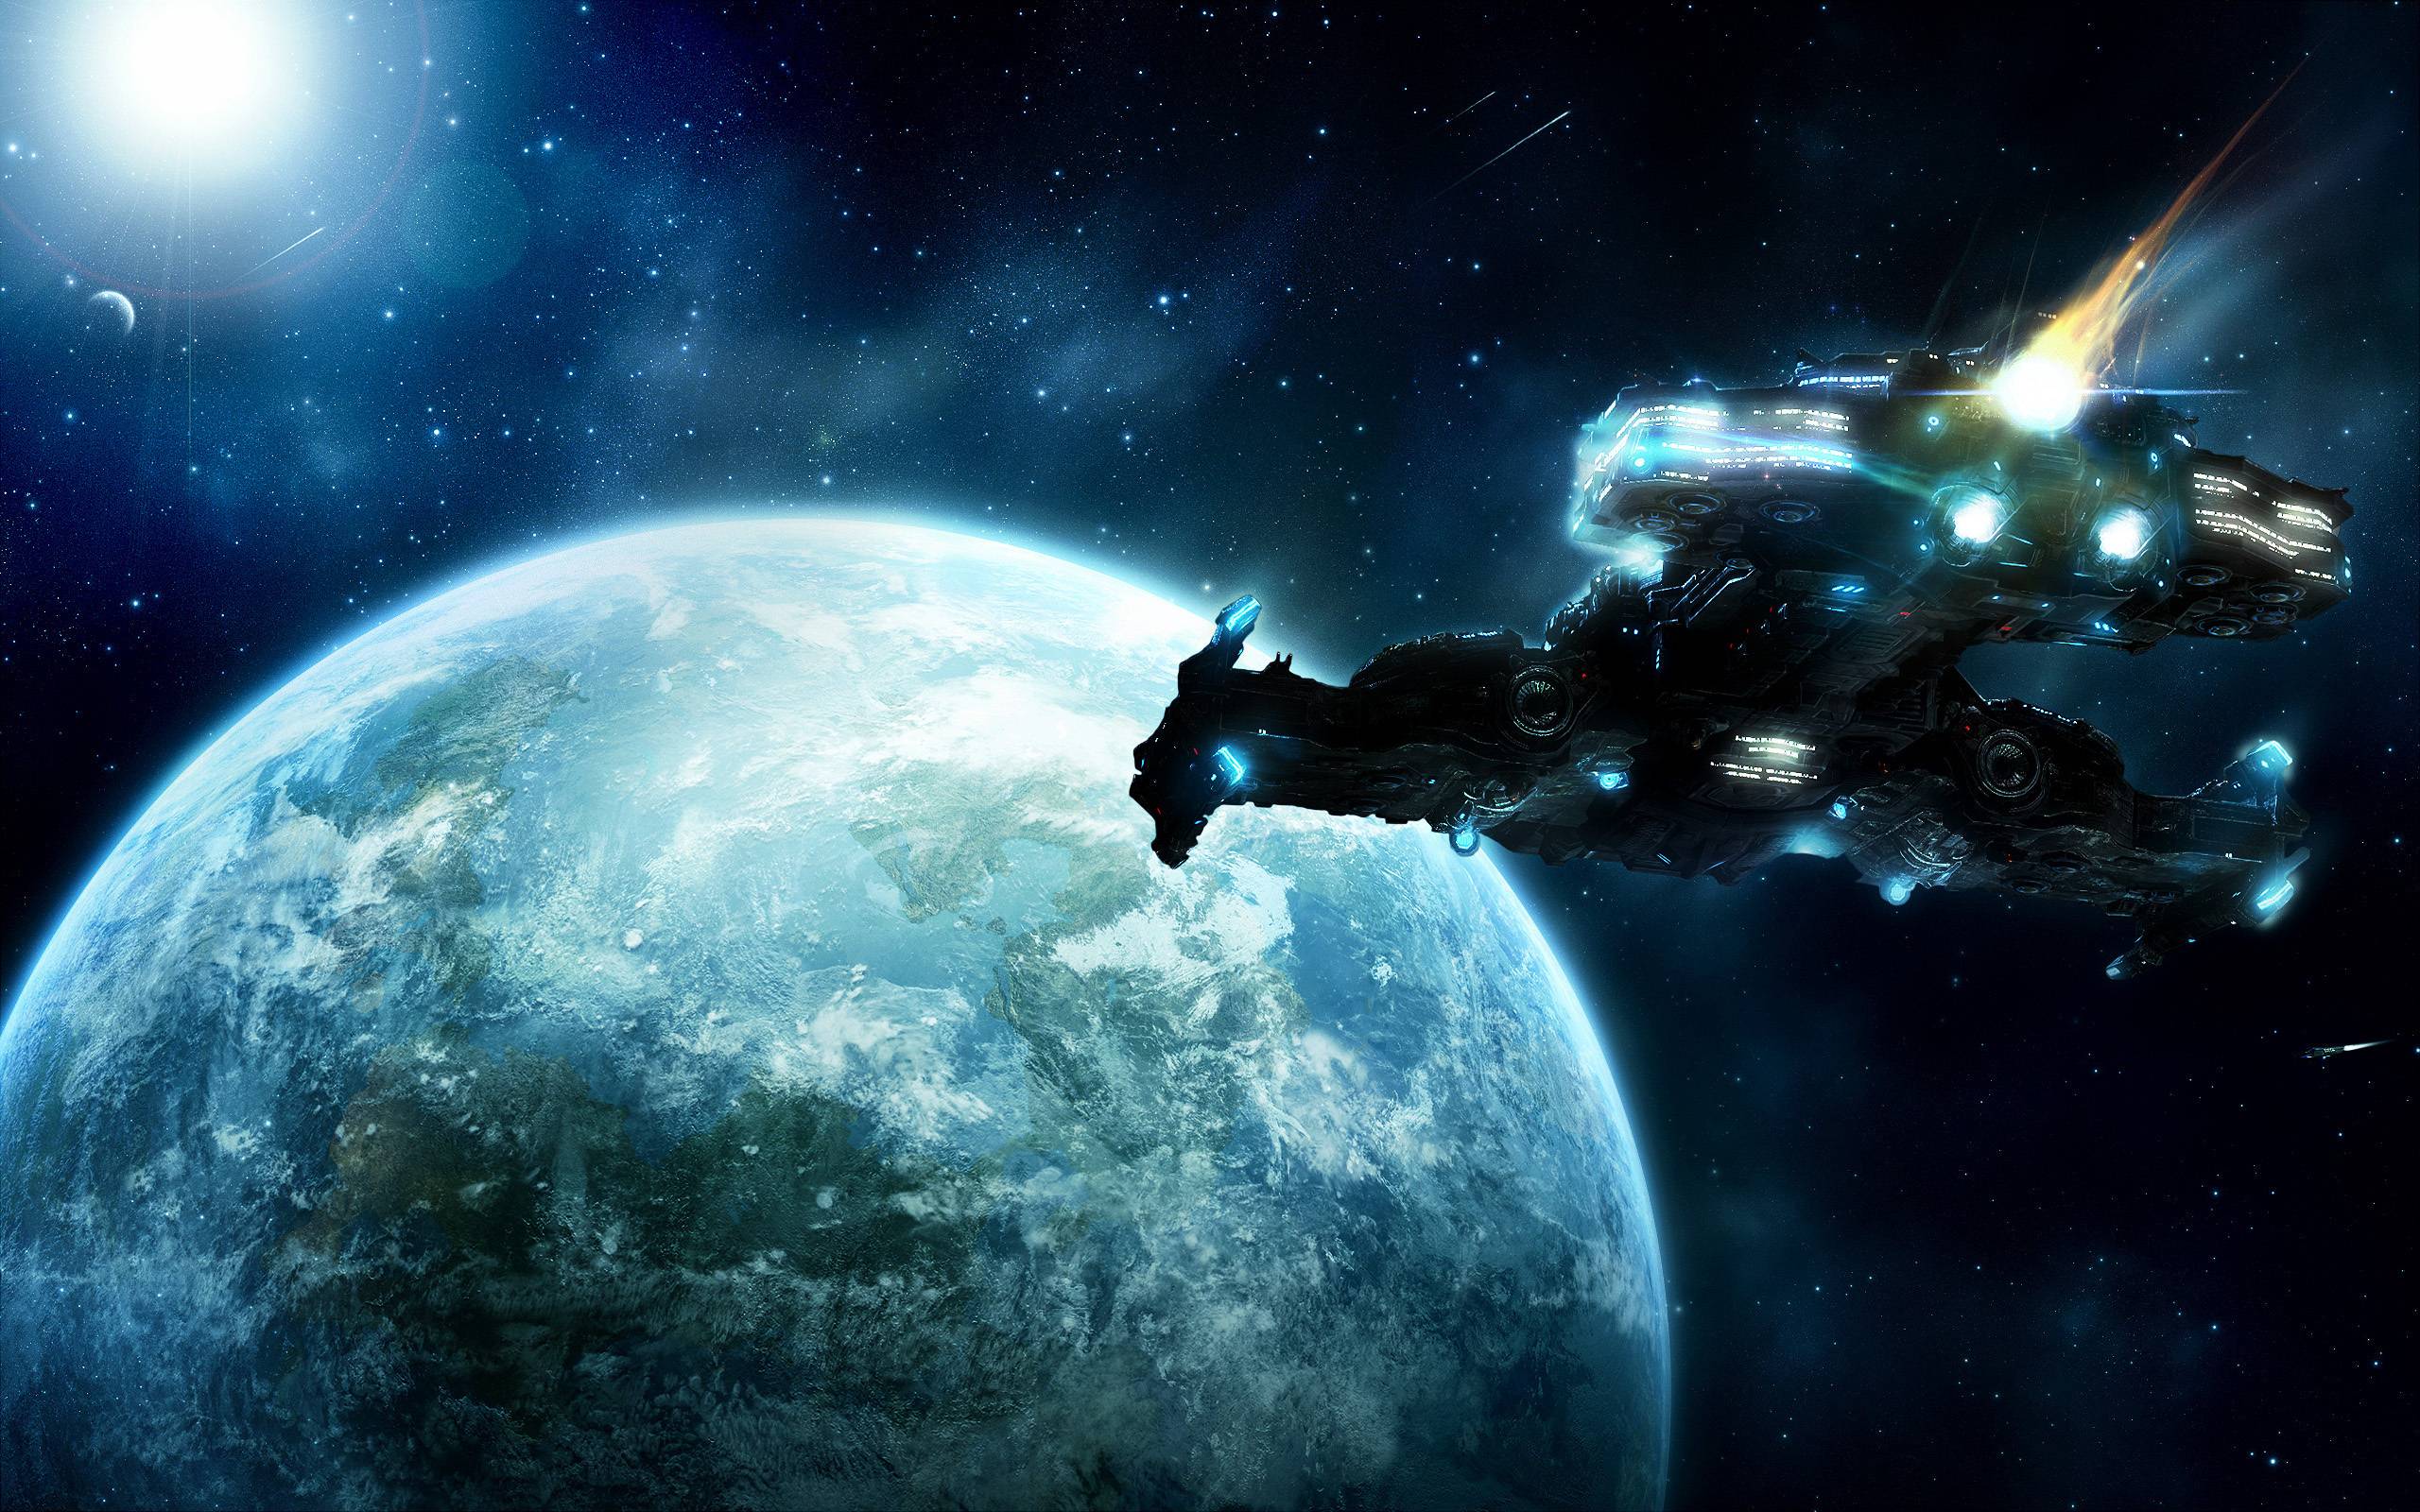 Spacecraft around the planet wallpaper and image